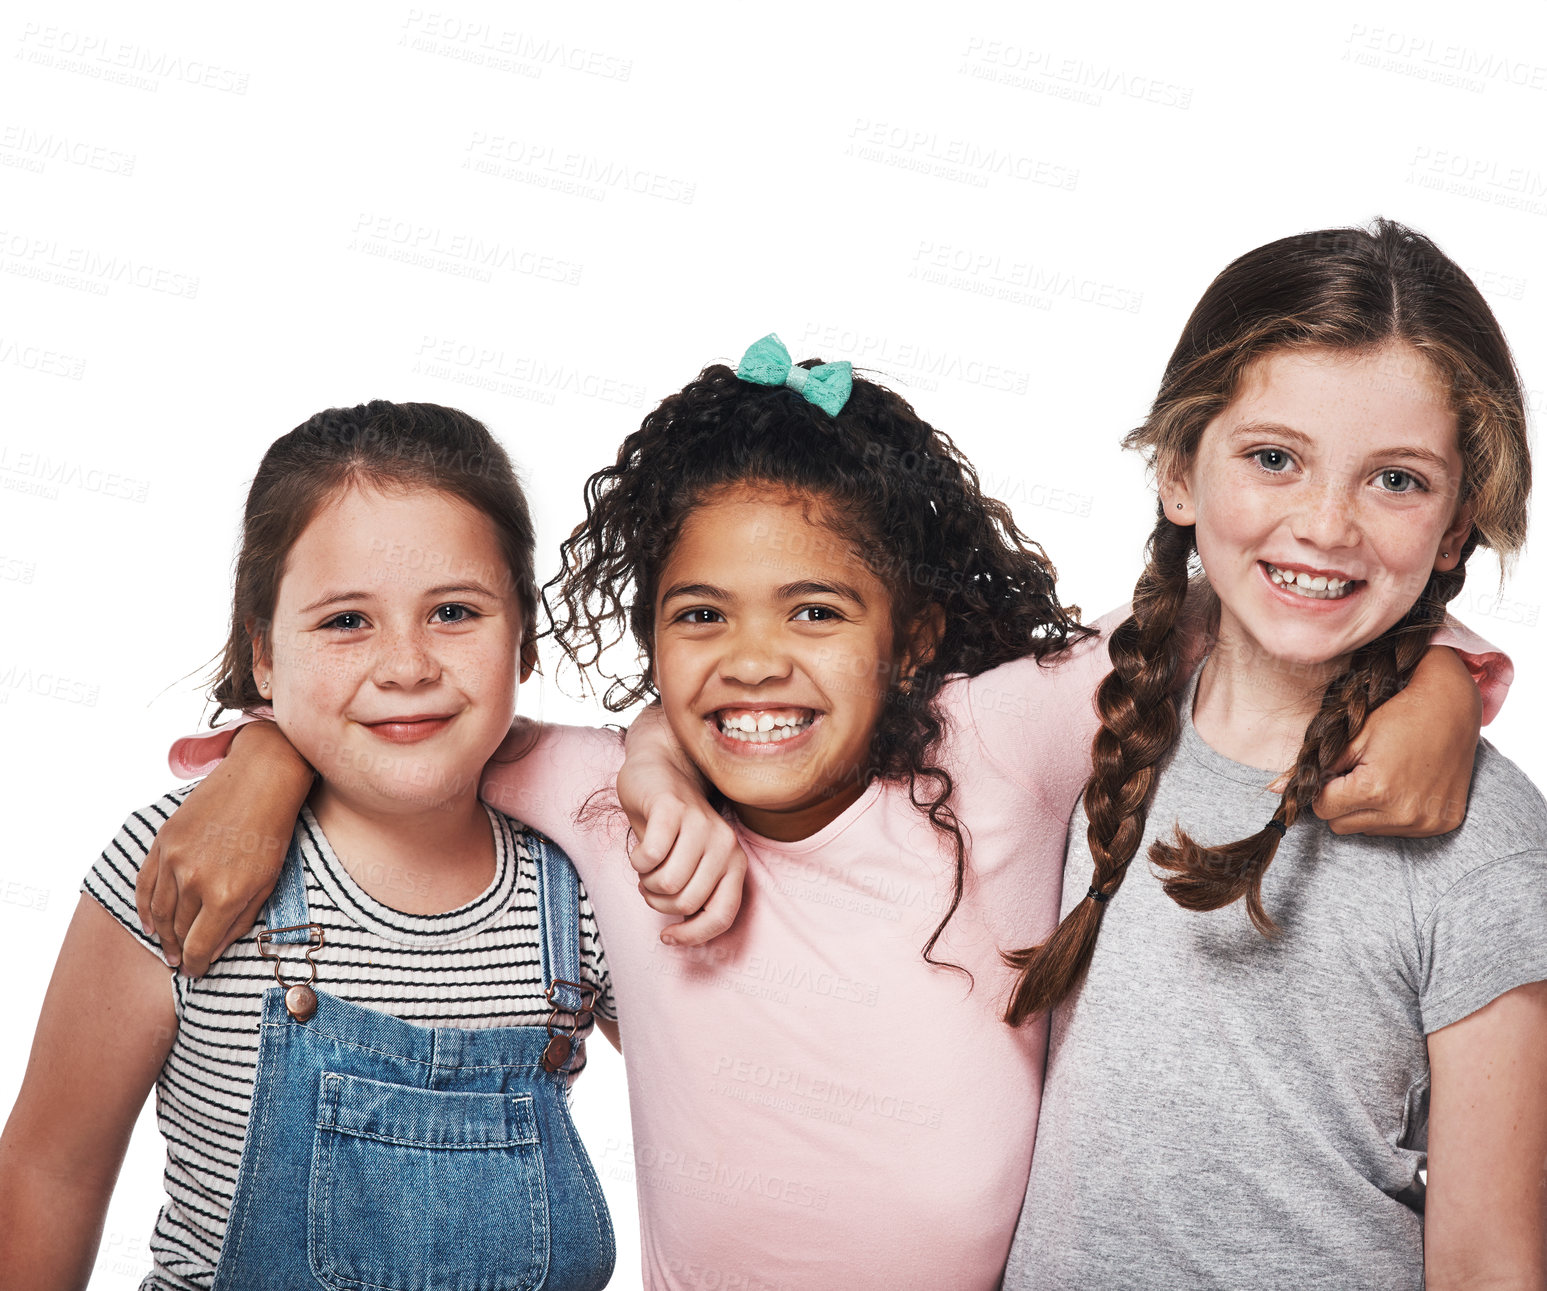 Buy stock photo Studio portrait of a group of three happy girls embracing one another against a white background